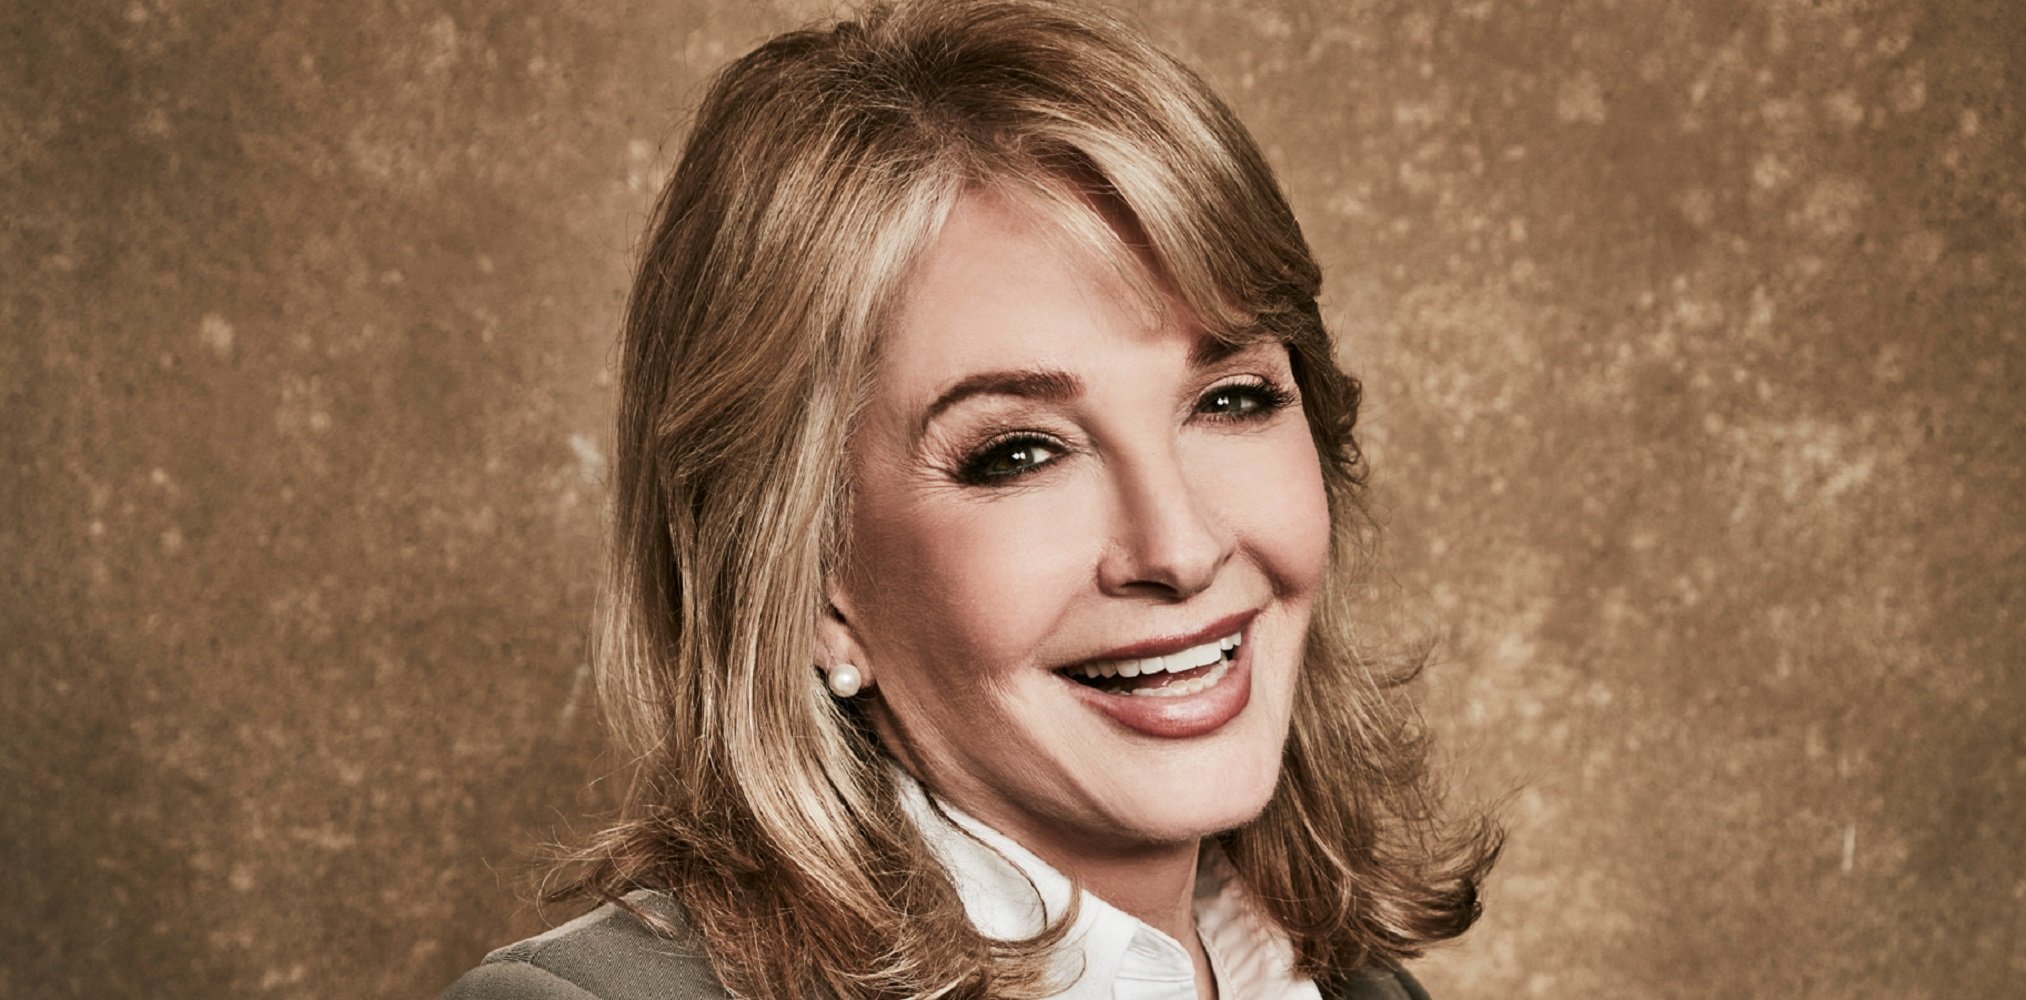 Days of Our Lives sneak peek features Marlena Evans, pictured here in an old publicity photo